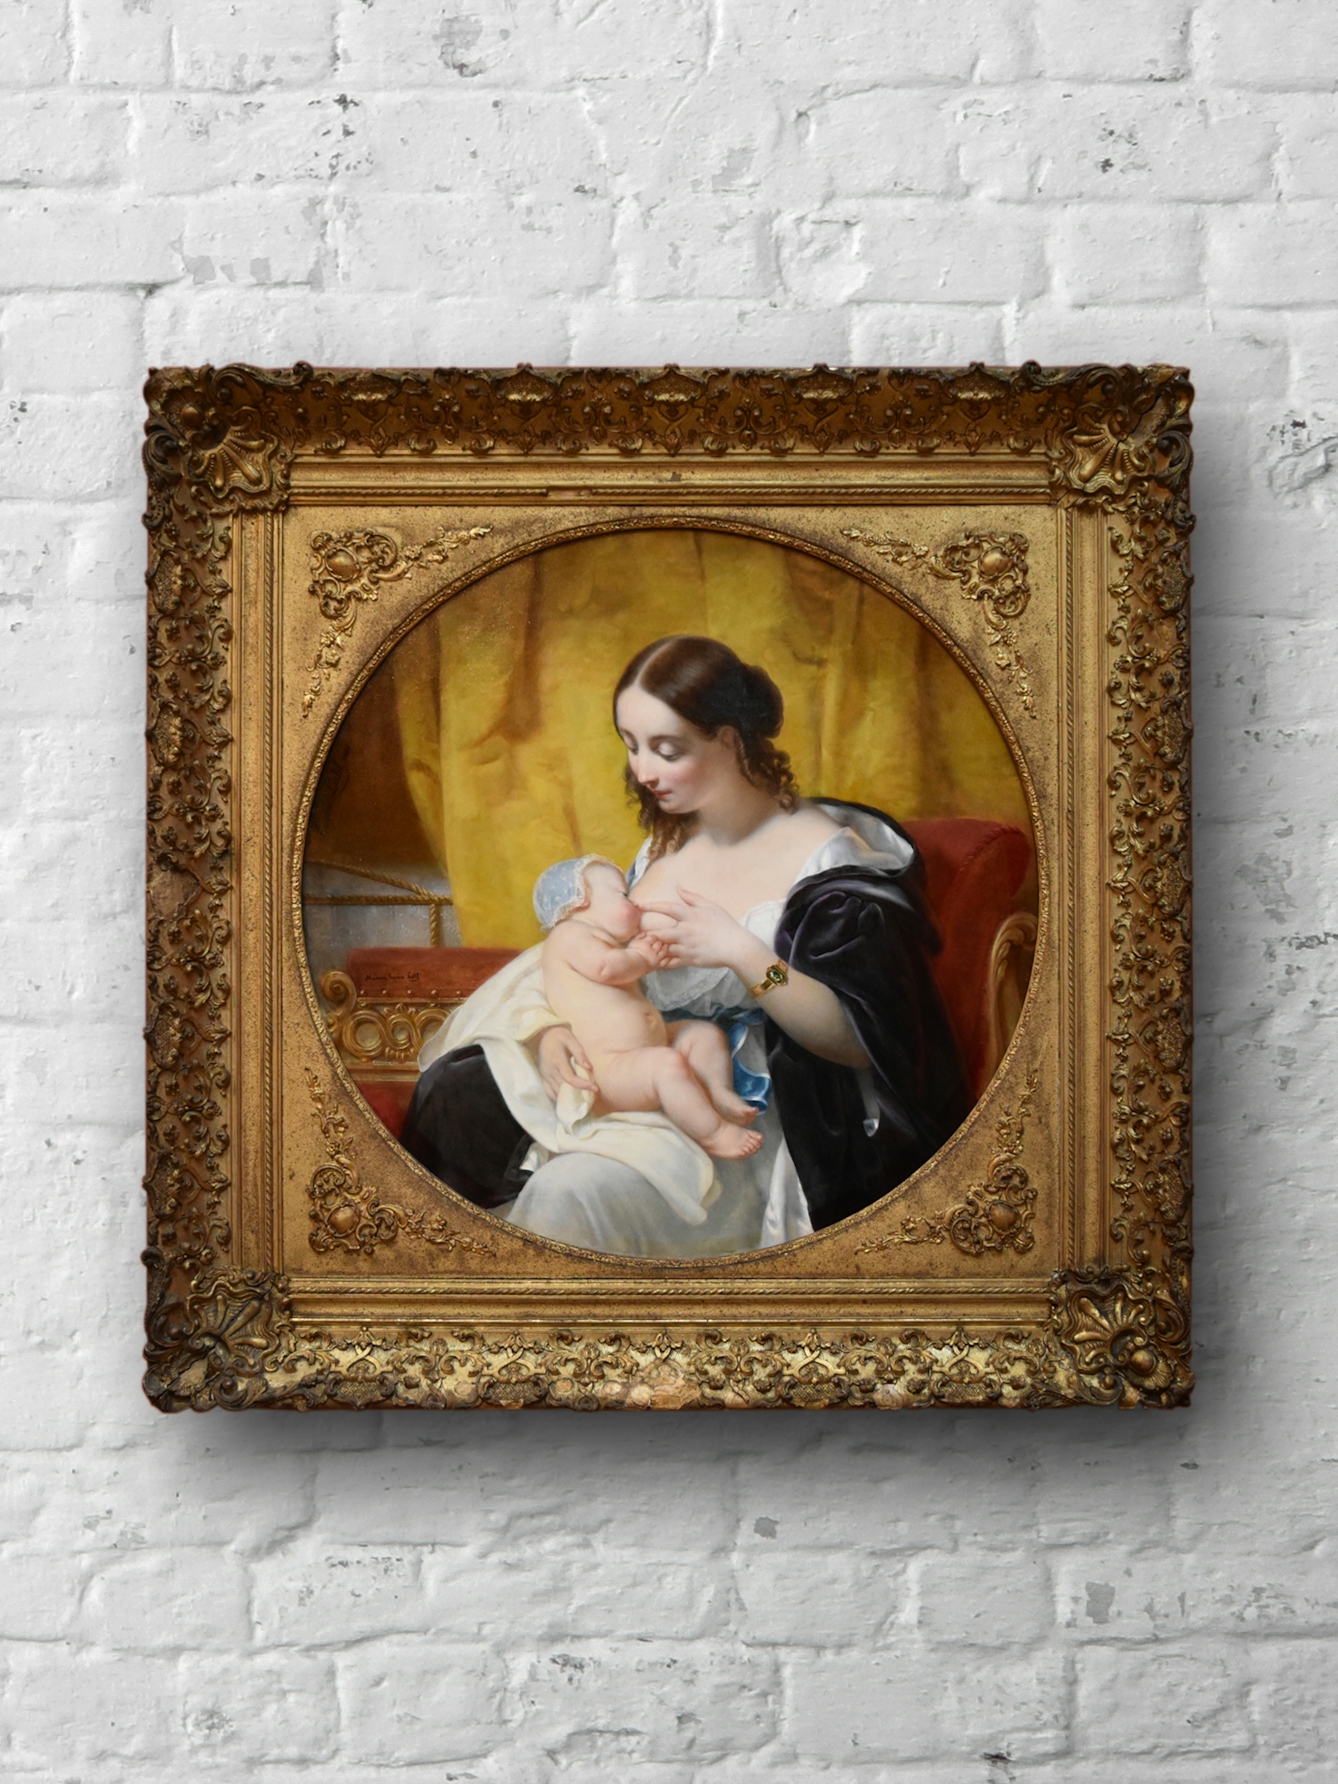 An image of an oil painting depicting a women acting as a wet nurse and breastfeeding a baby. The women is shown cradling the small child with one arm and holding her breast to the child's mouth. The painting is in an ornate gilt frame with a circular aperture in the middle, and set against a white brick background.